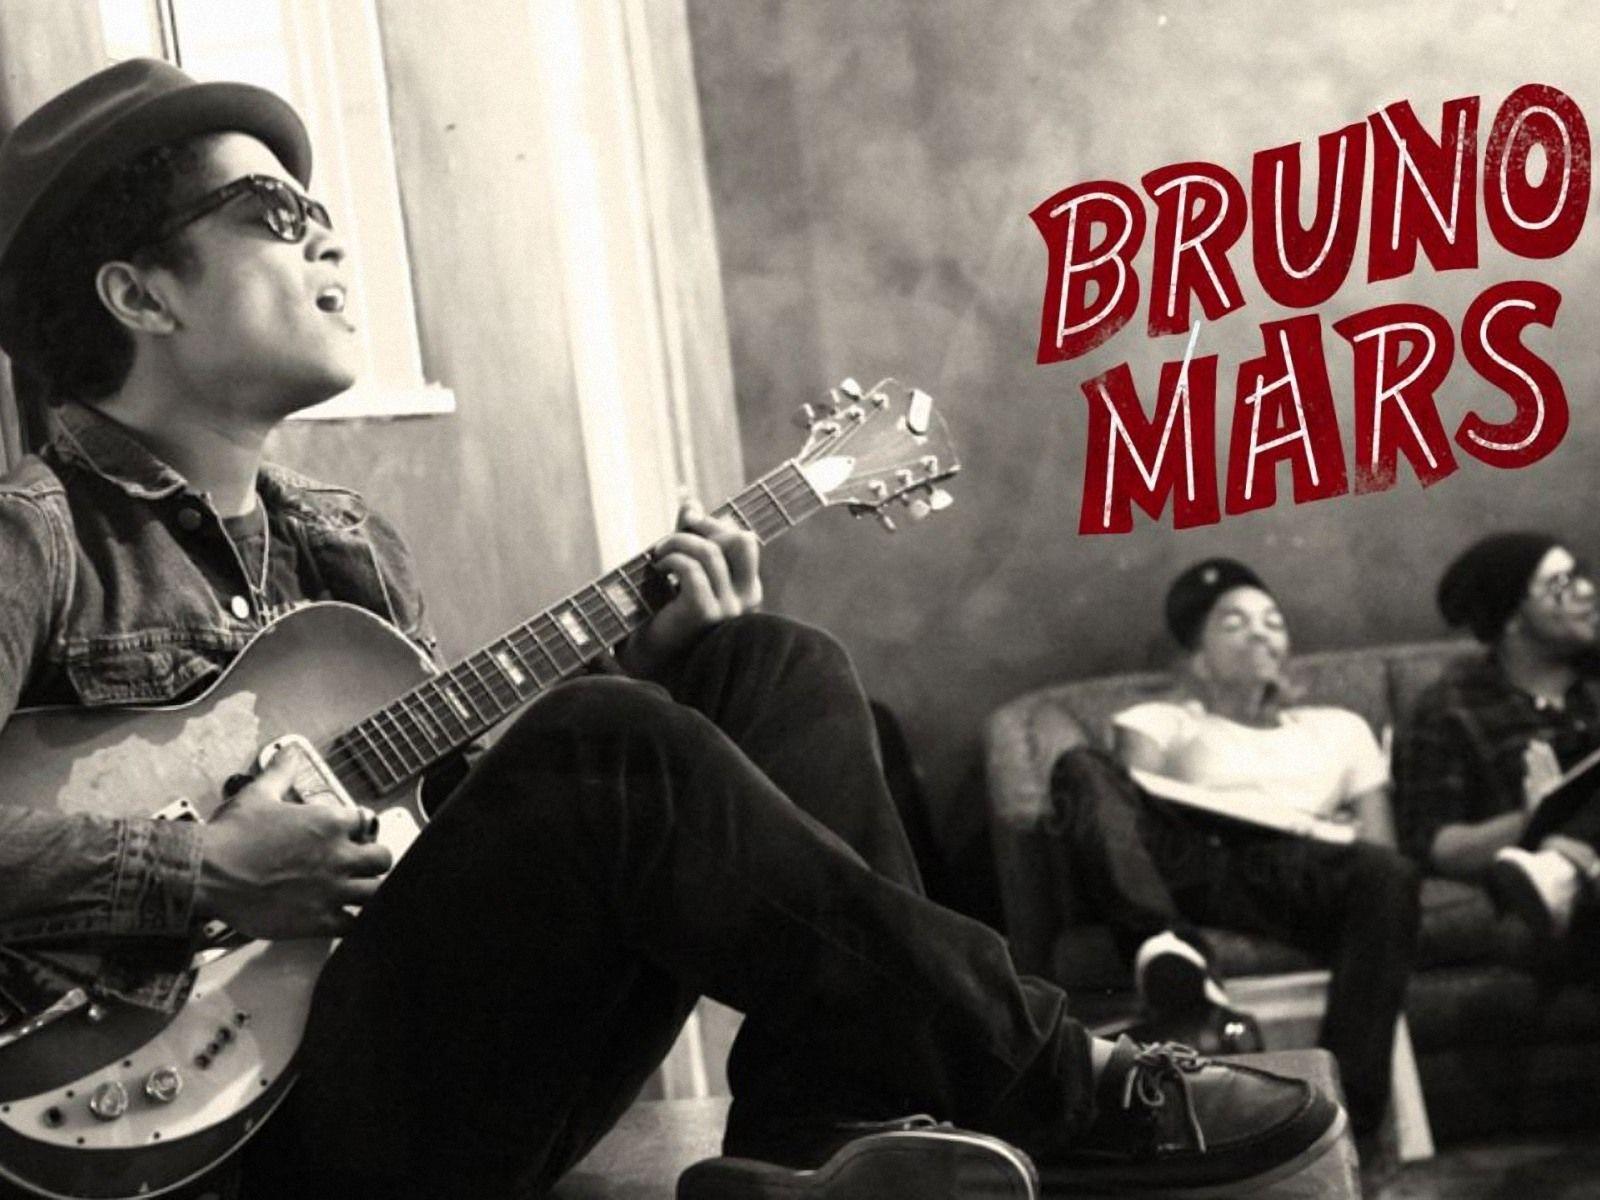 Bruno Mars playing a guitar with two other men in the background. - Bruno Mars